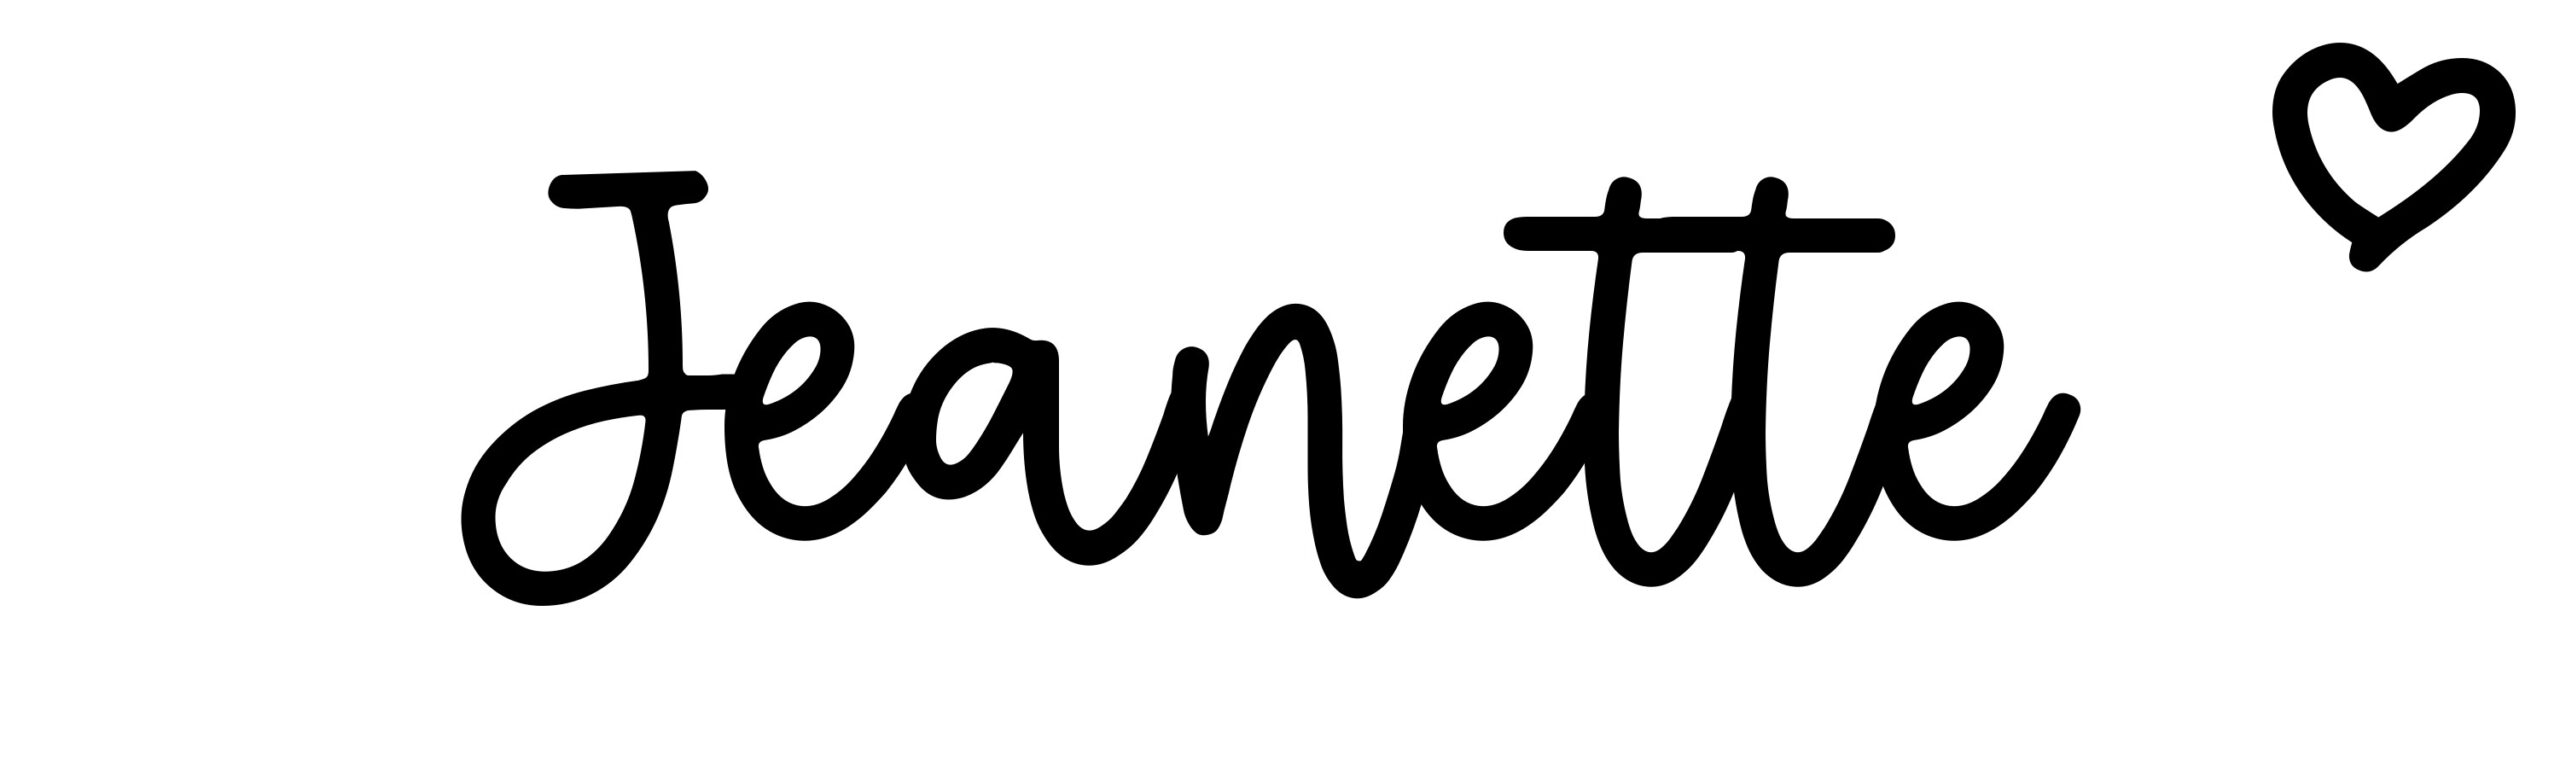 Jeanette - Name meaning, origin, variations and more